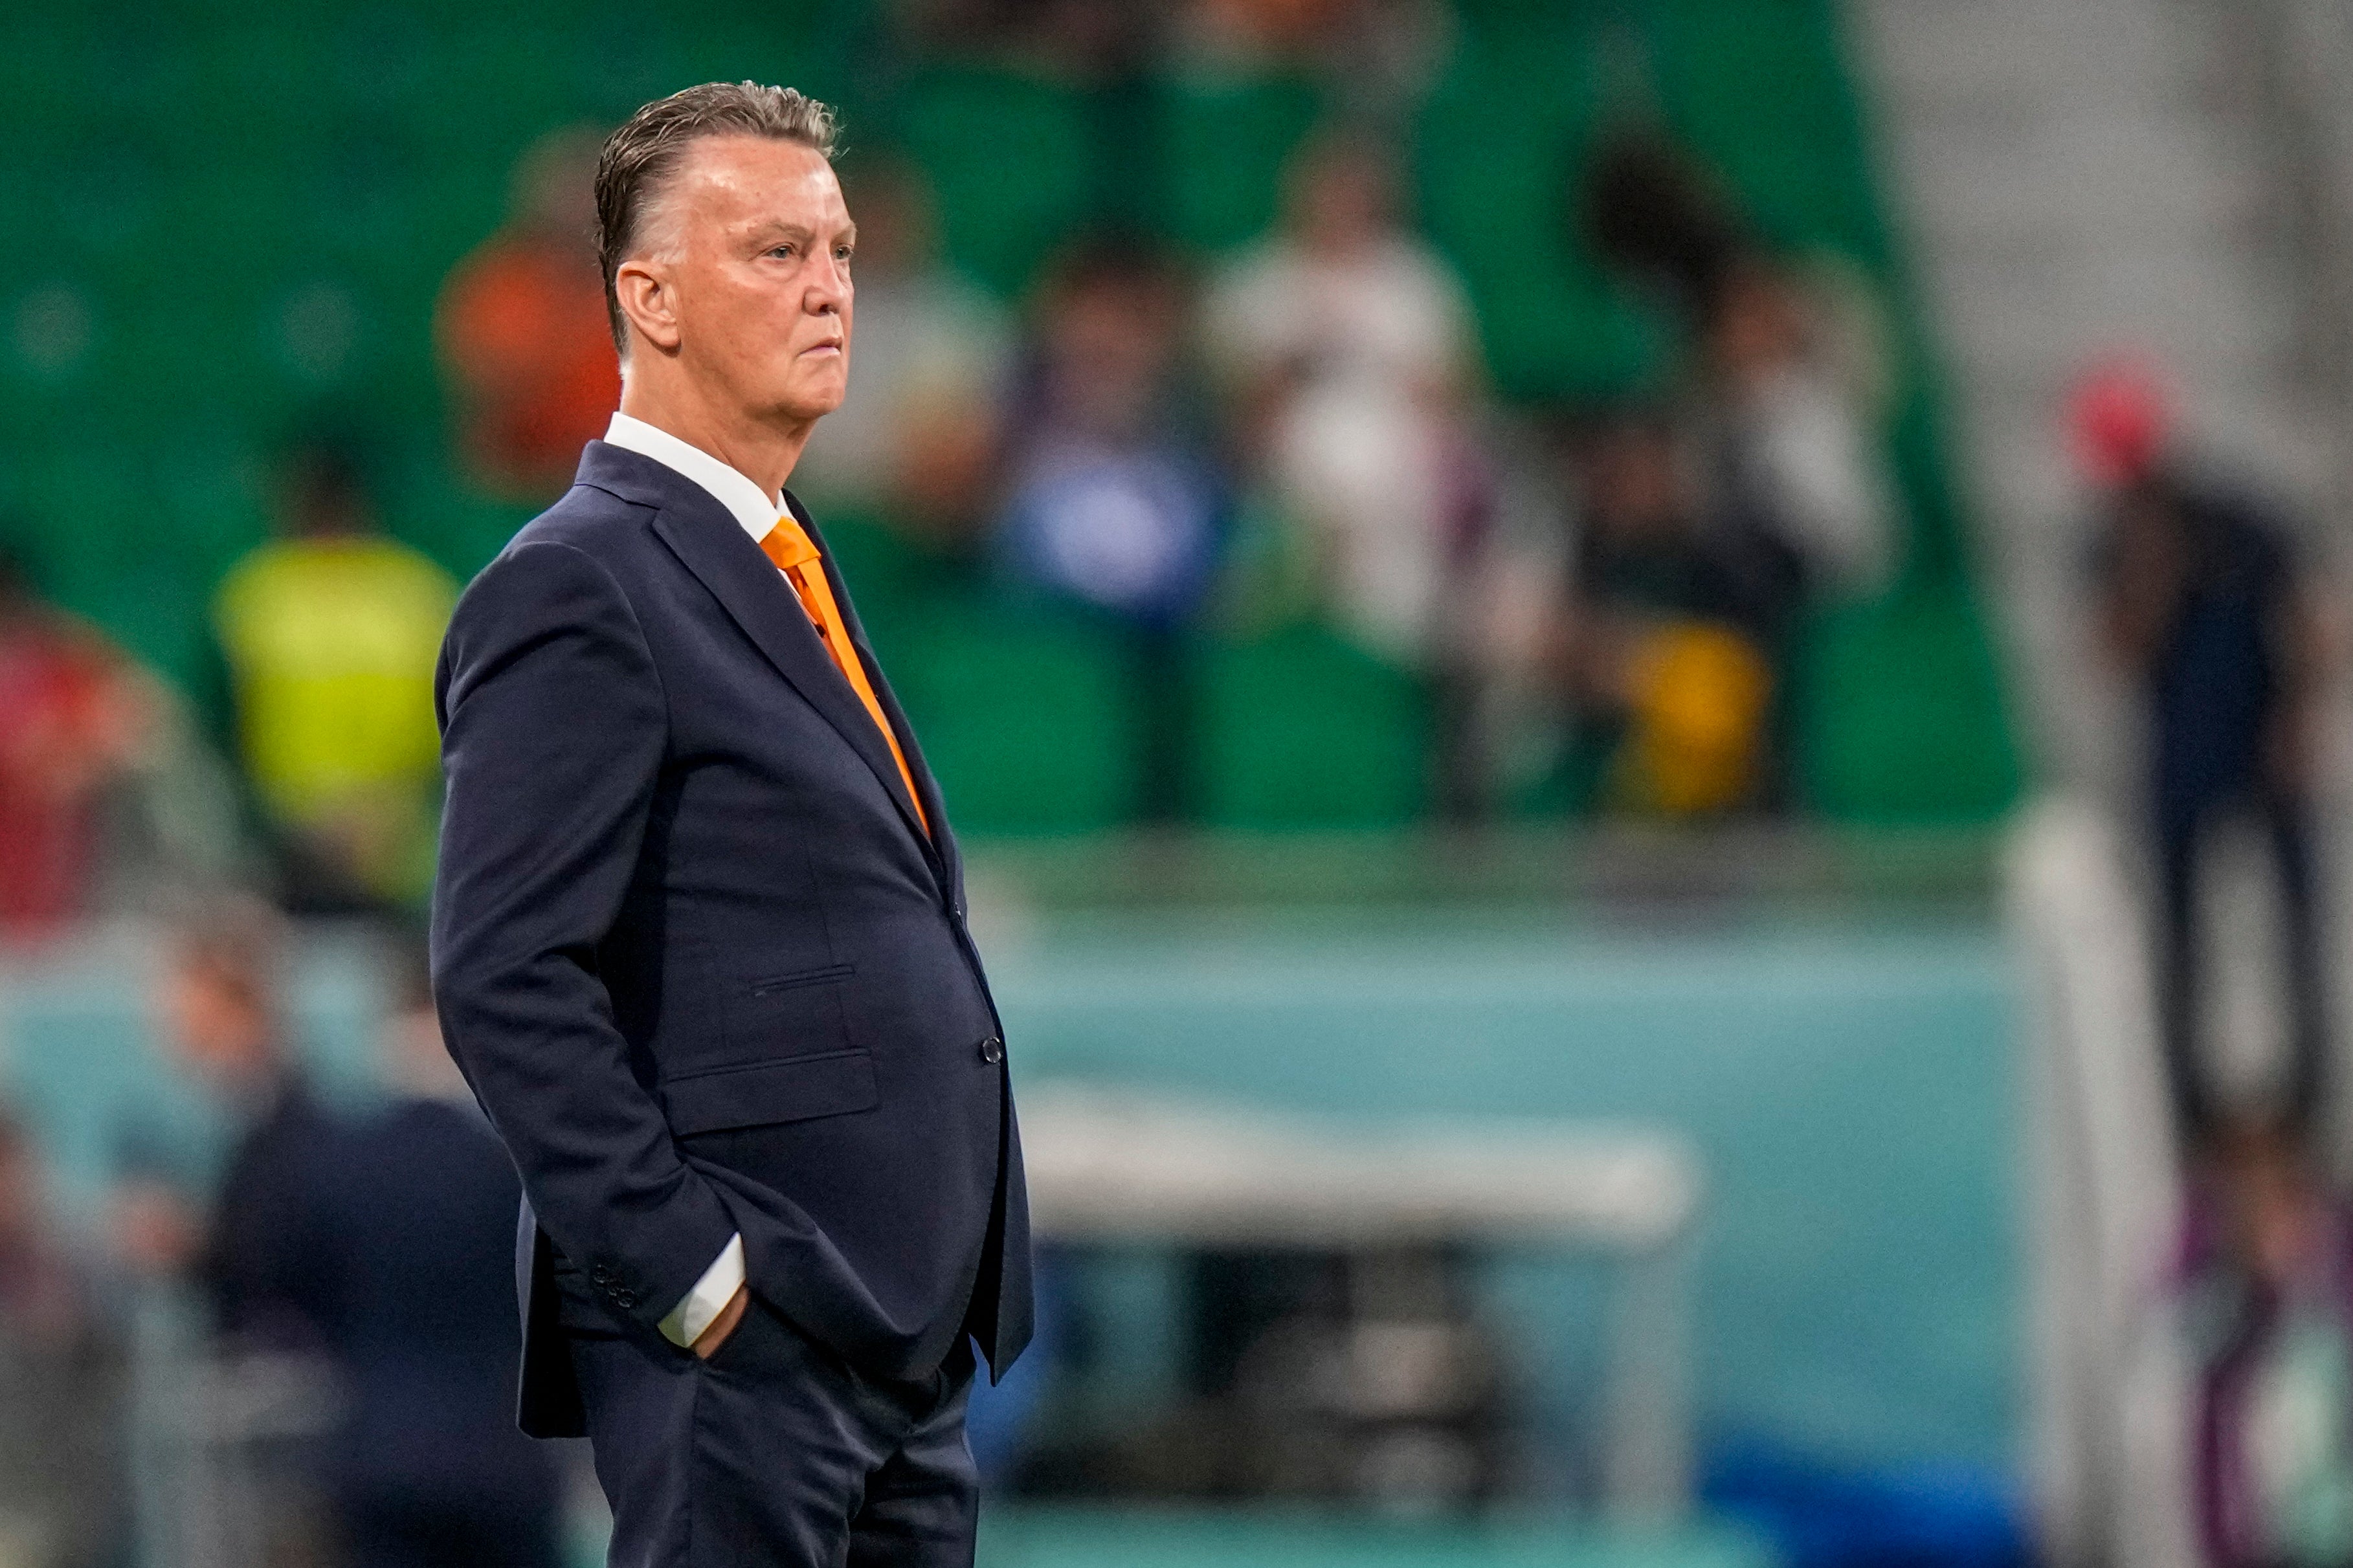 Van Gaal enjoys the World Cup with the Netherlands